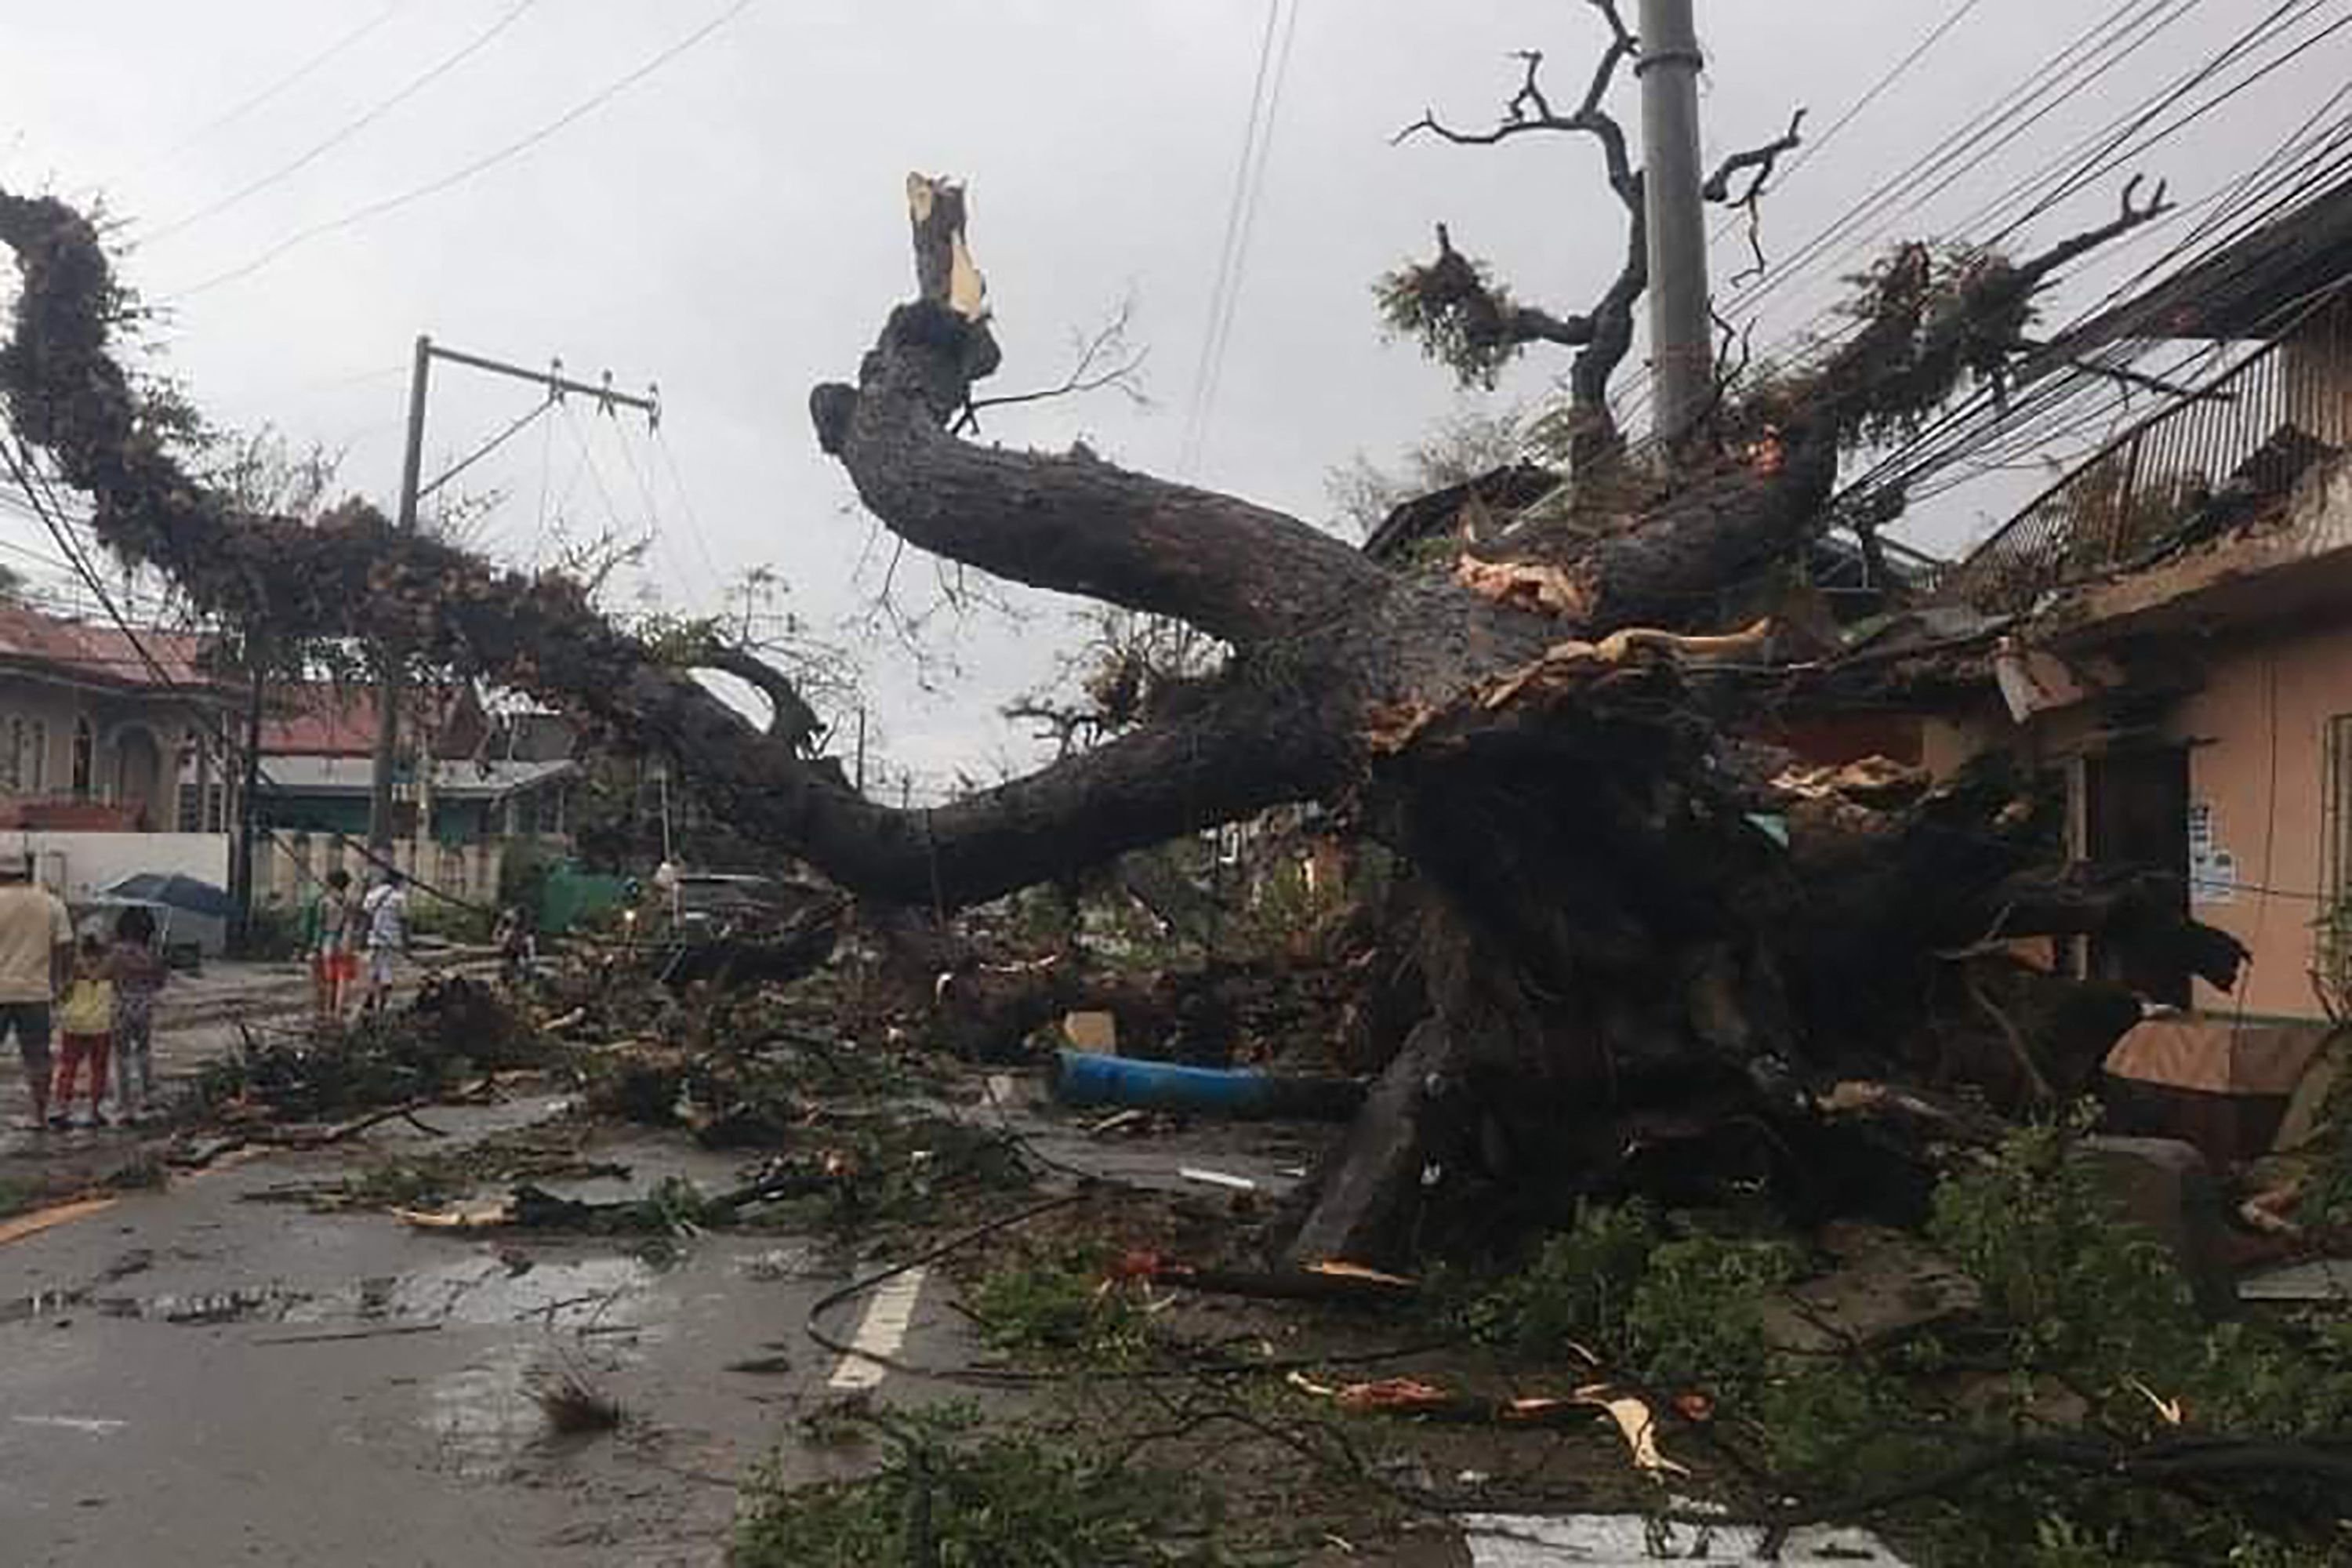 Residents walk past an uprooted tree downed by inclement weather from Super Typhoon Rai, along a road in the town of Naga a day after the storm hit Cebu province, Philippines, Dec. 17, 2021. (AFP Photo)